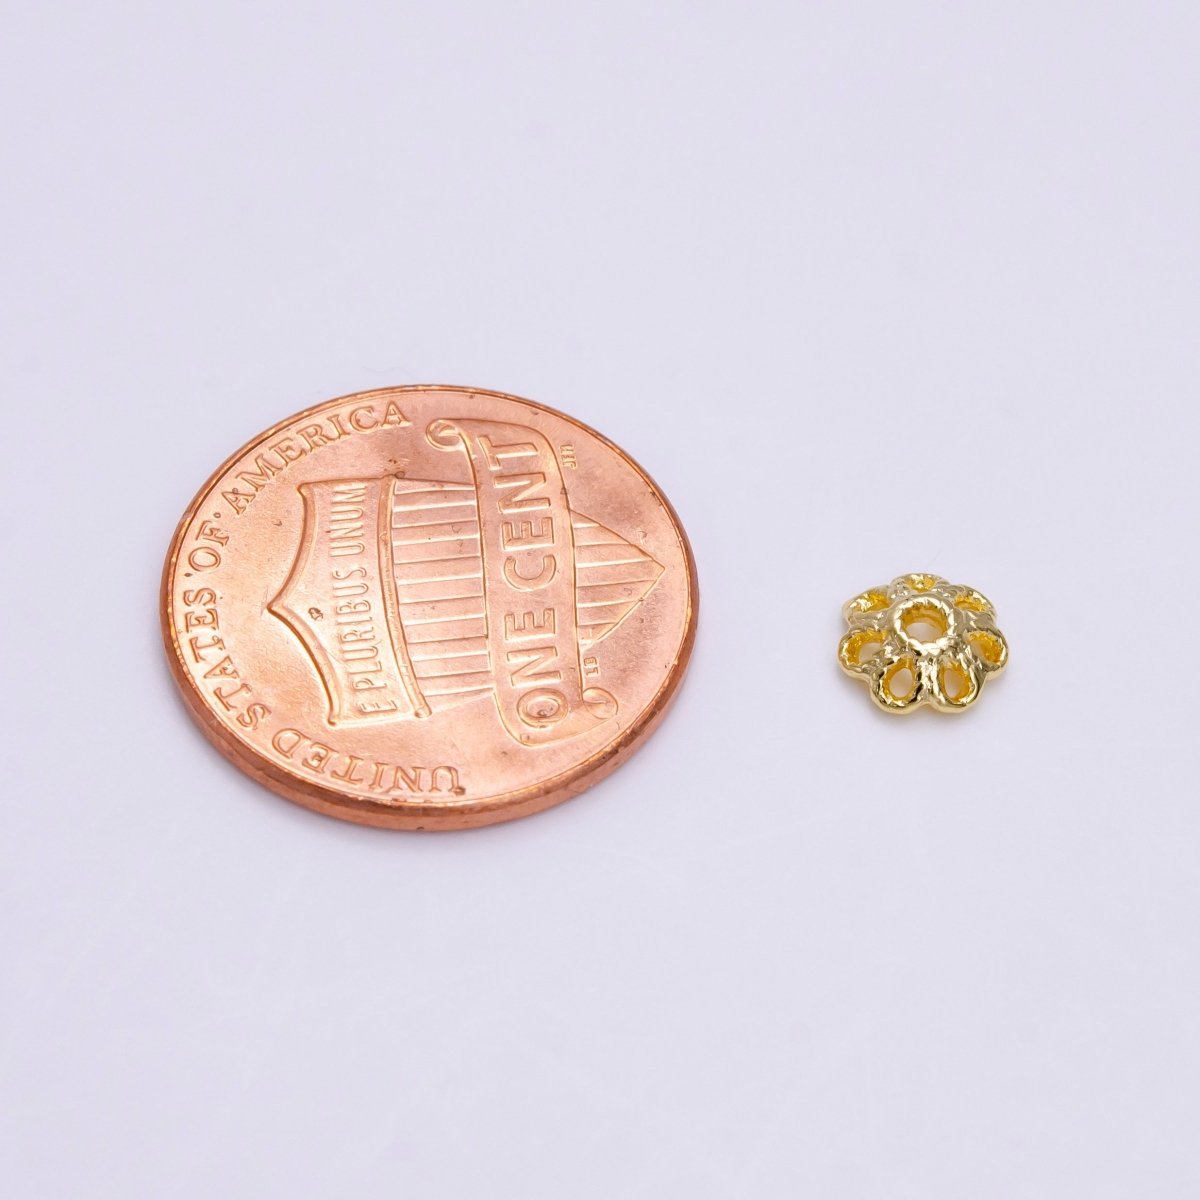 6mm Gold Filled Flower Bead Cap, Dainty Floral Bead Toppers, Bead Making Supply Z-919 - DLUXCA